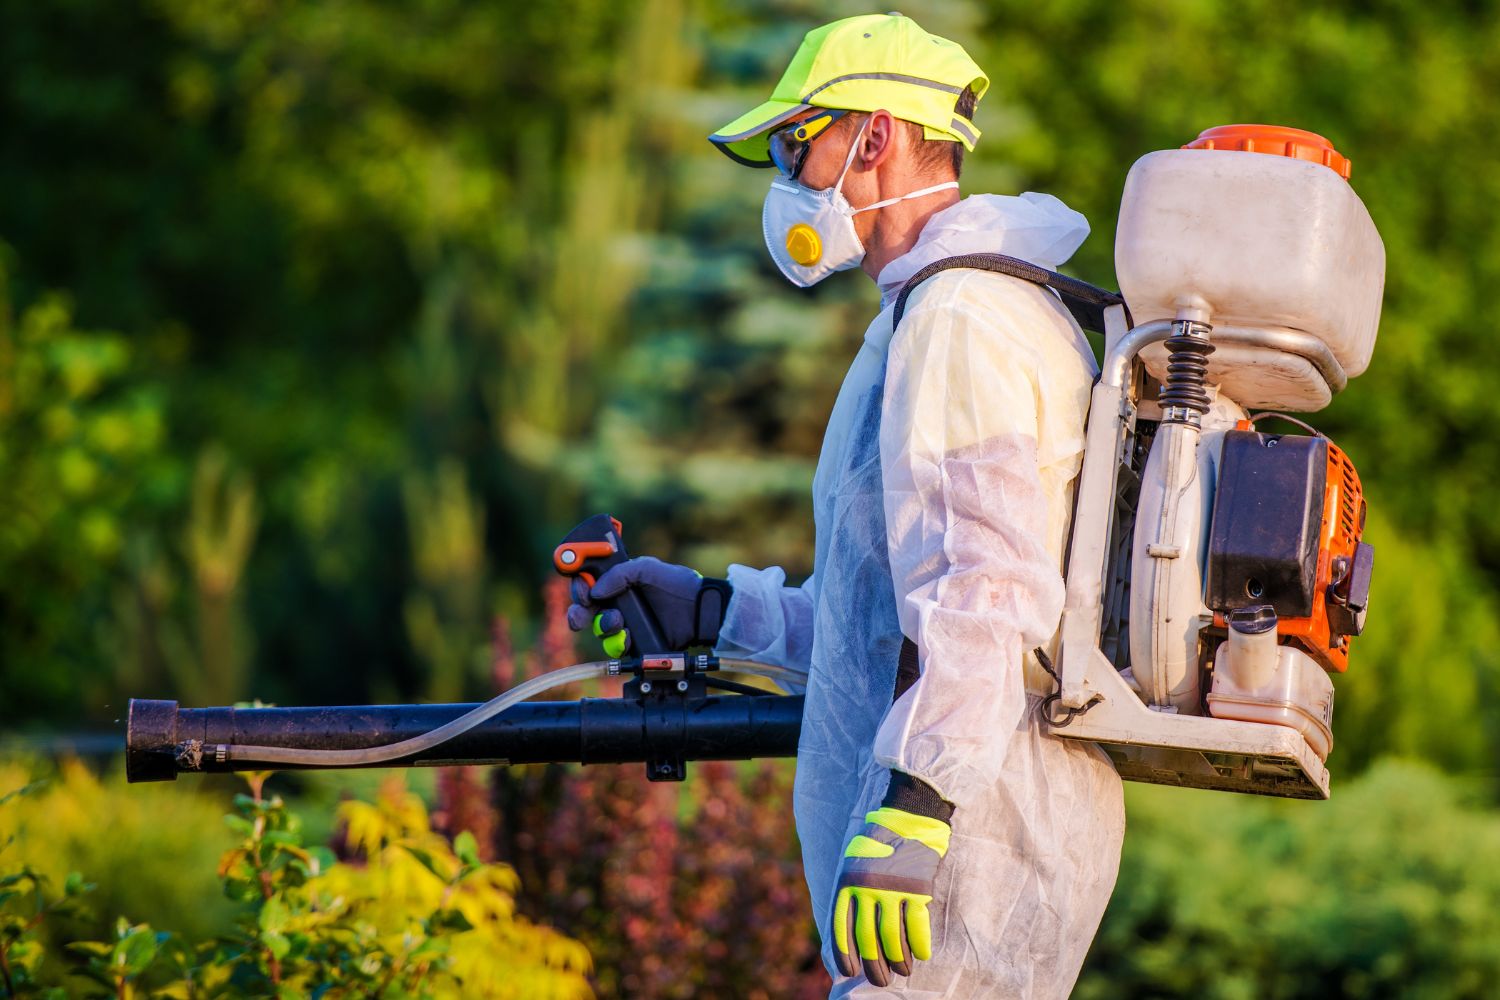 Learn what you can do to prevent Pest Control Services